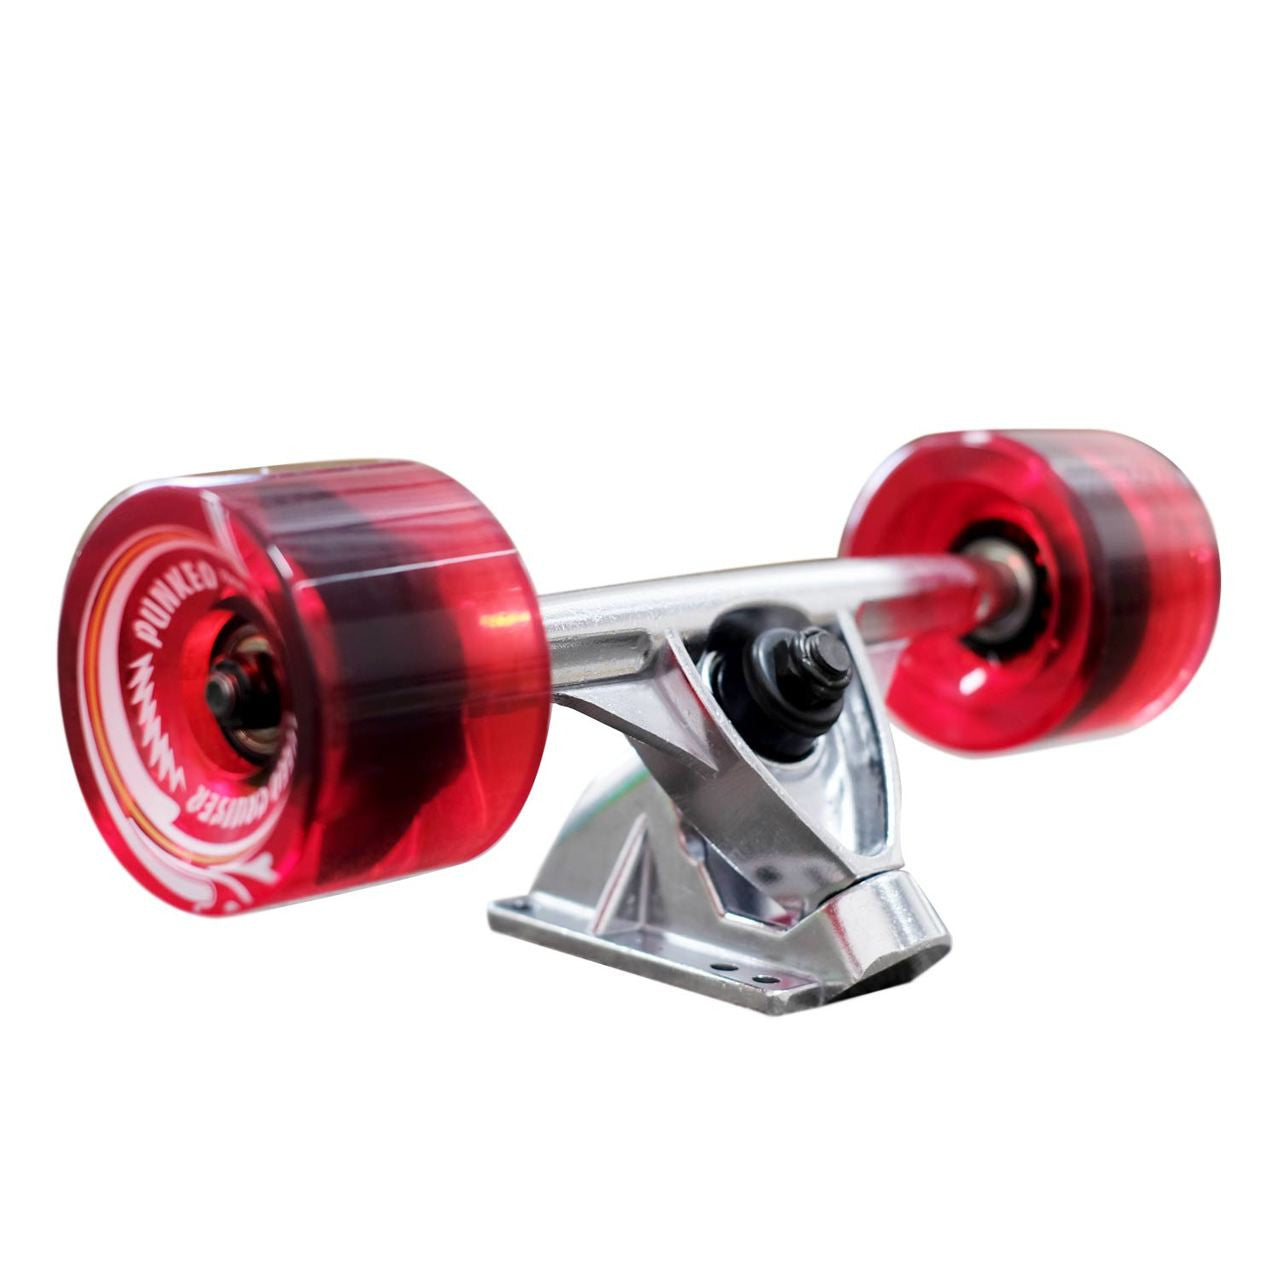 Yocaher Old School Longboard Complete - Checker Red